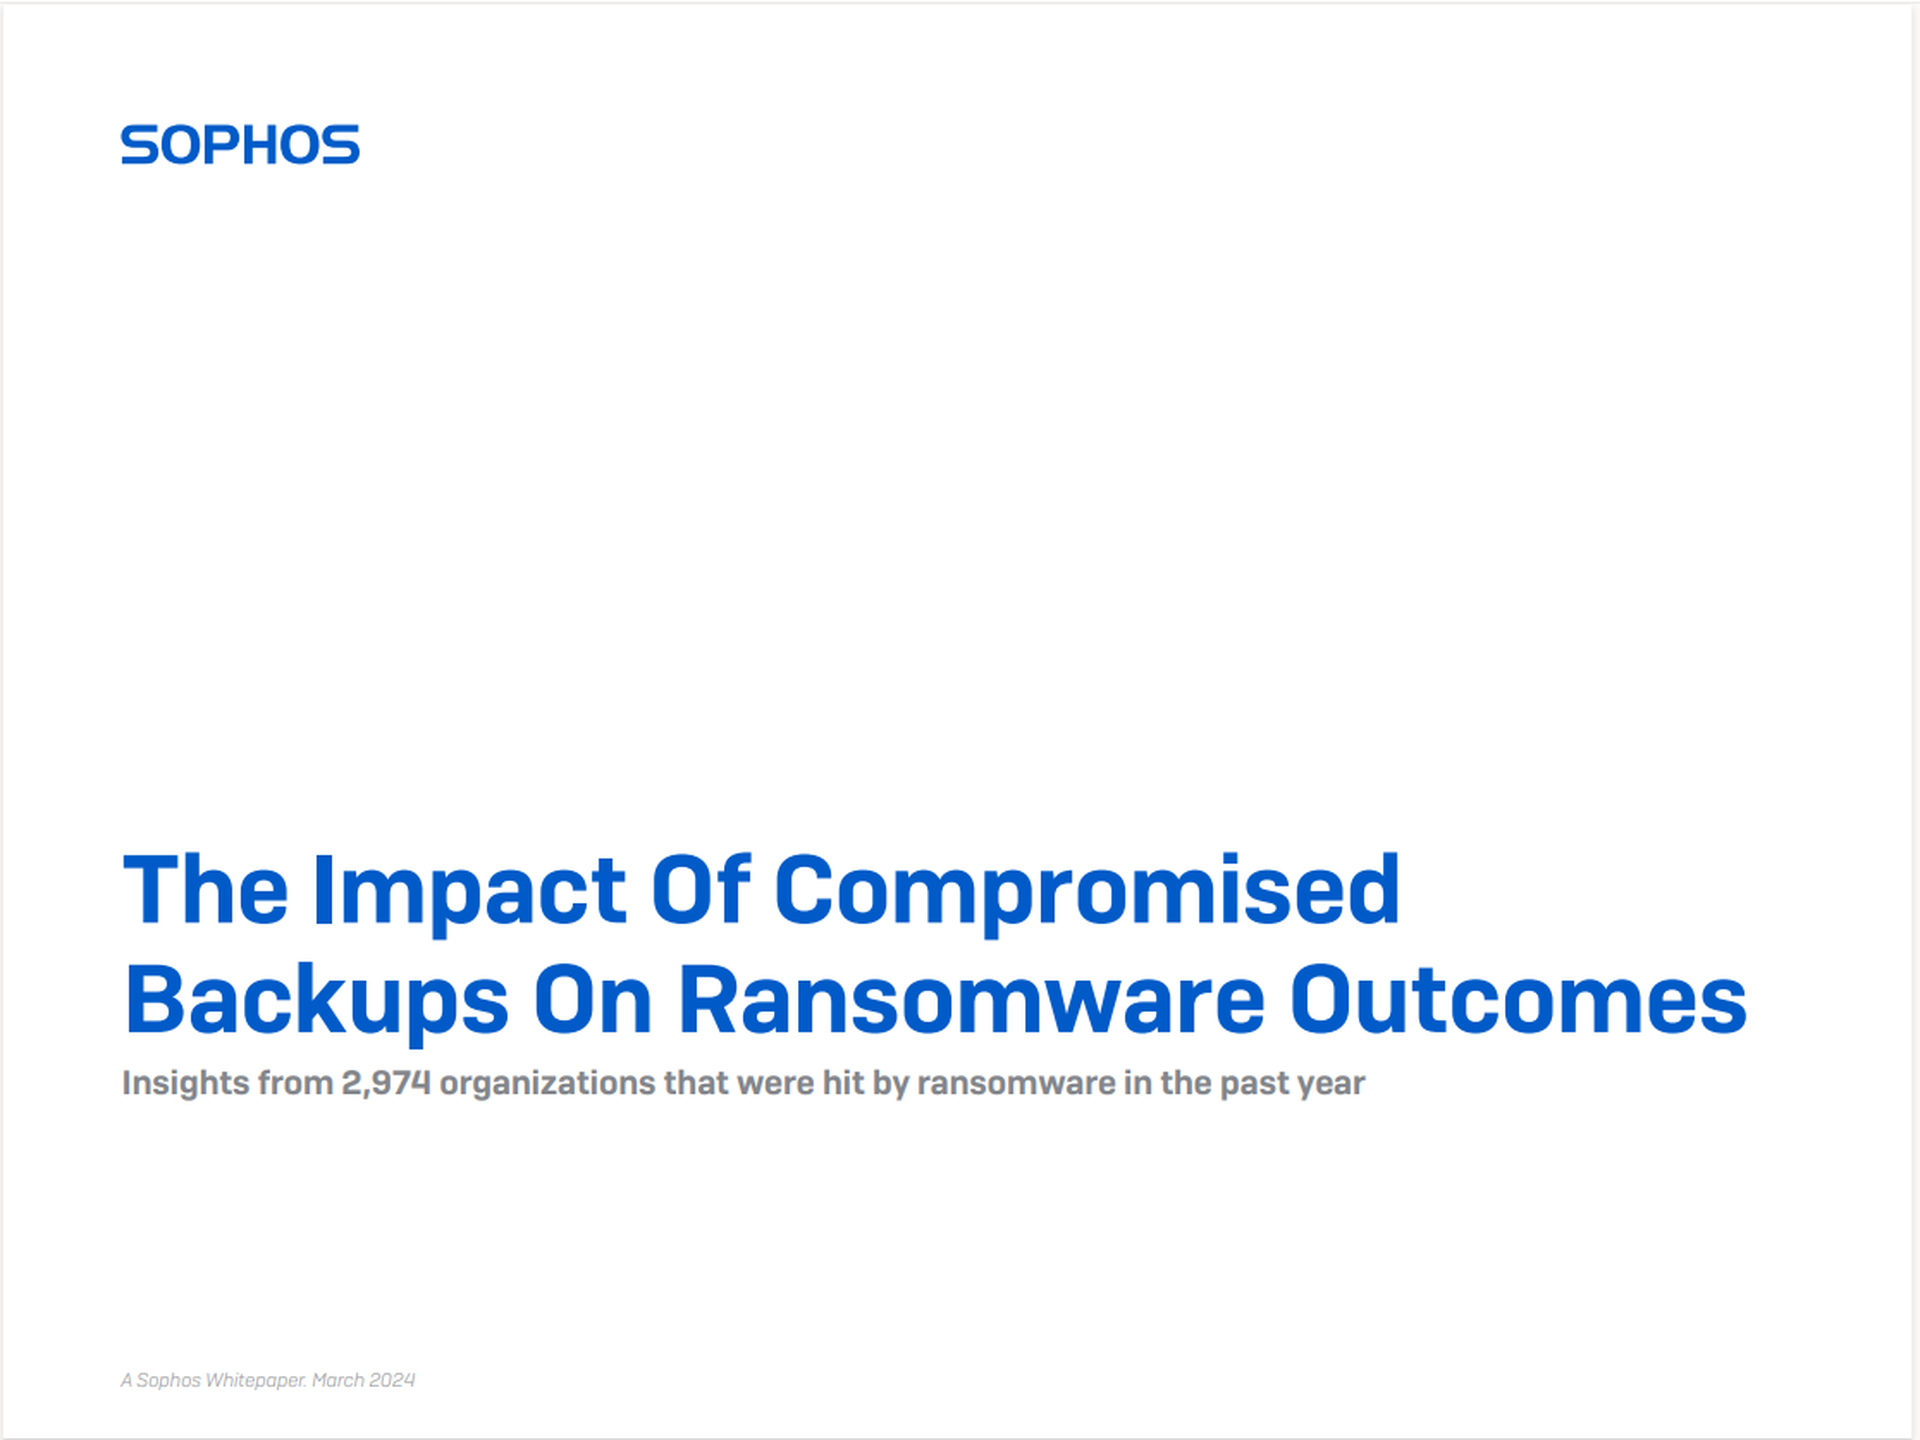 The Impact Of Compromised Backups On Ransomware Outcomes